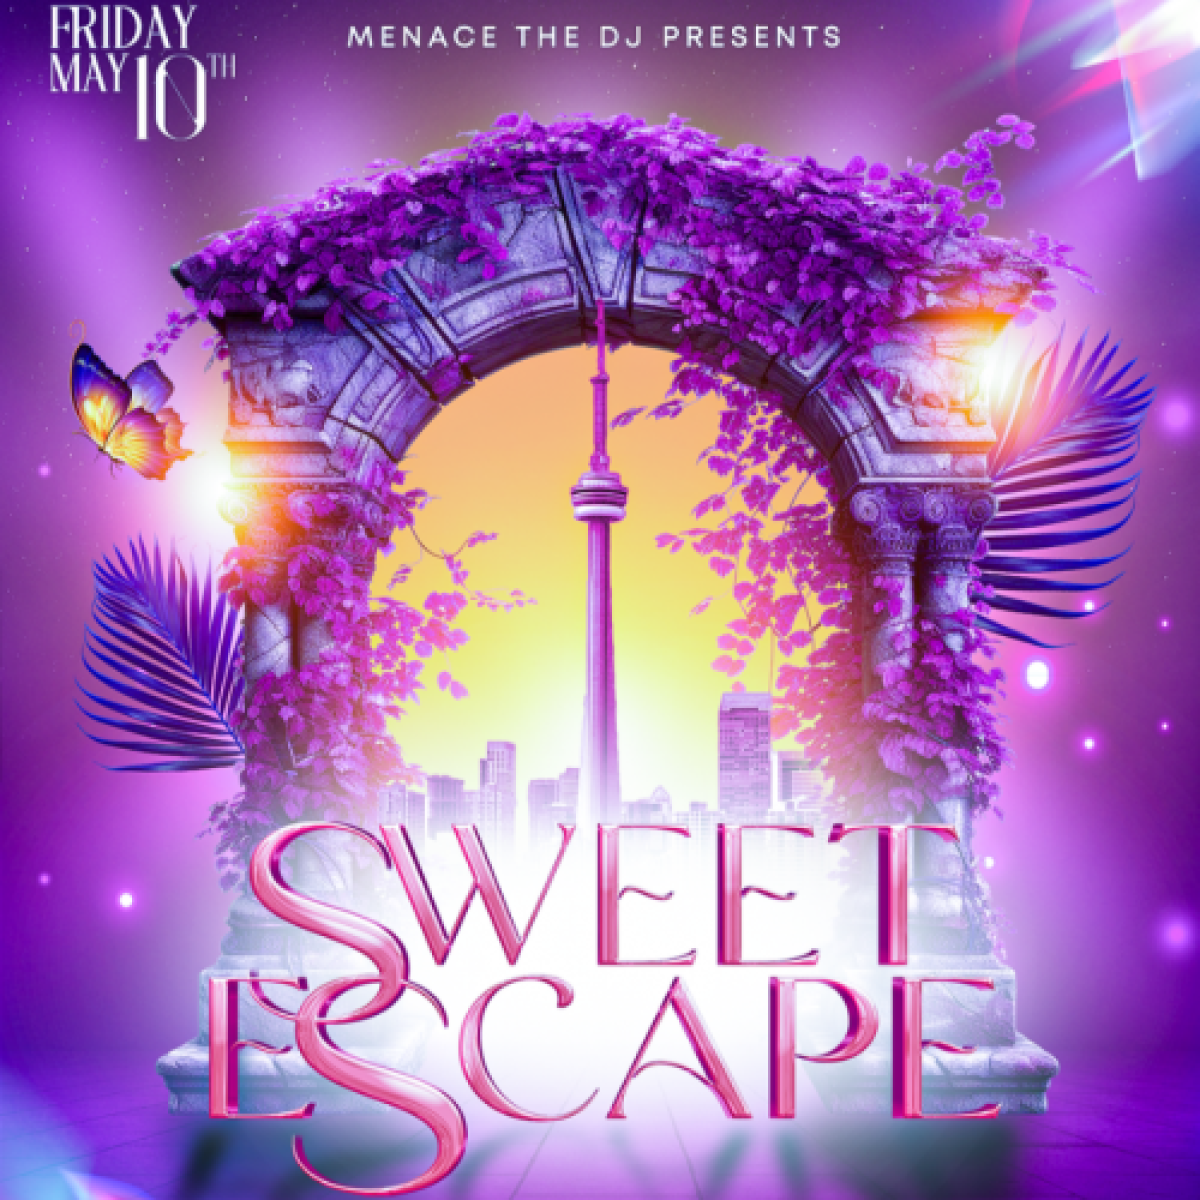 Sweet Escape flyer or graphic.